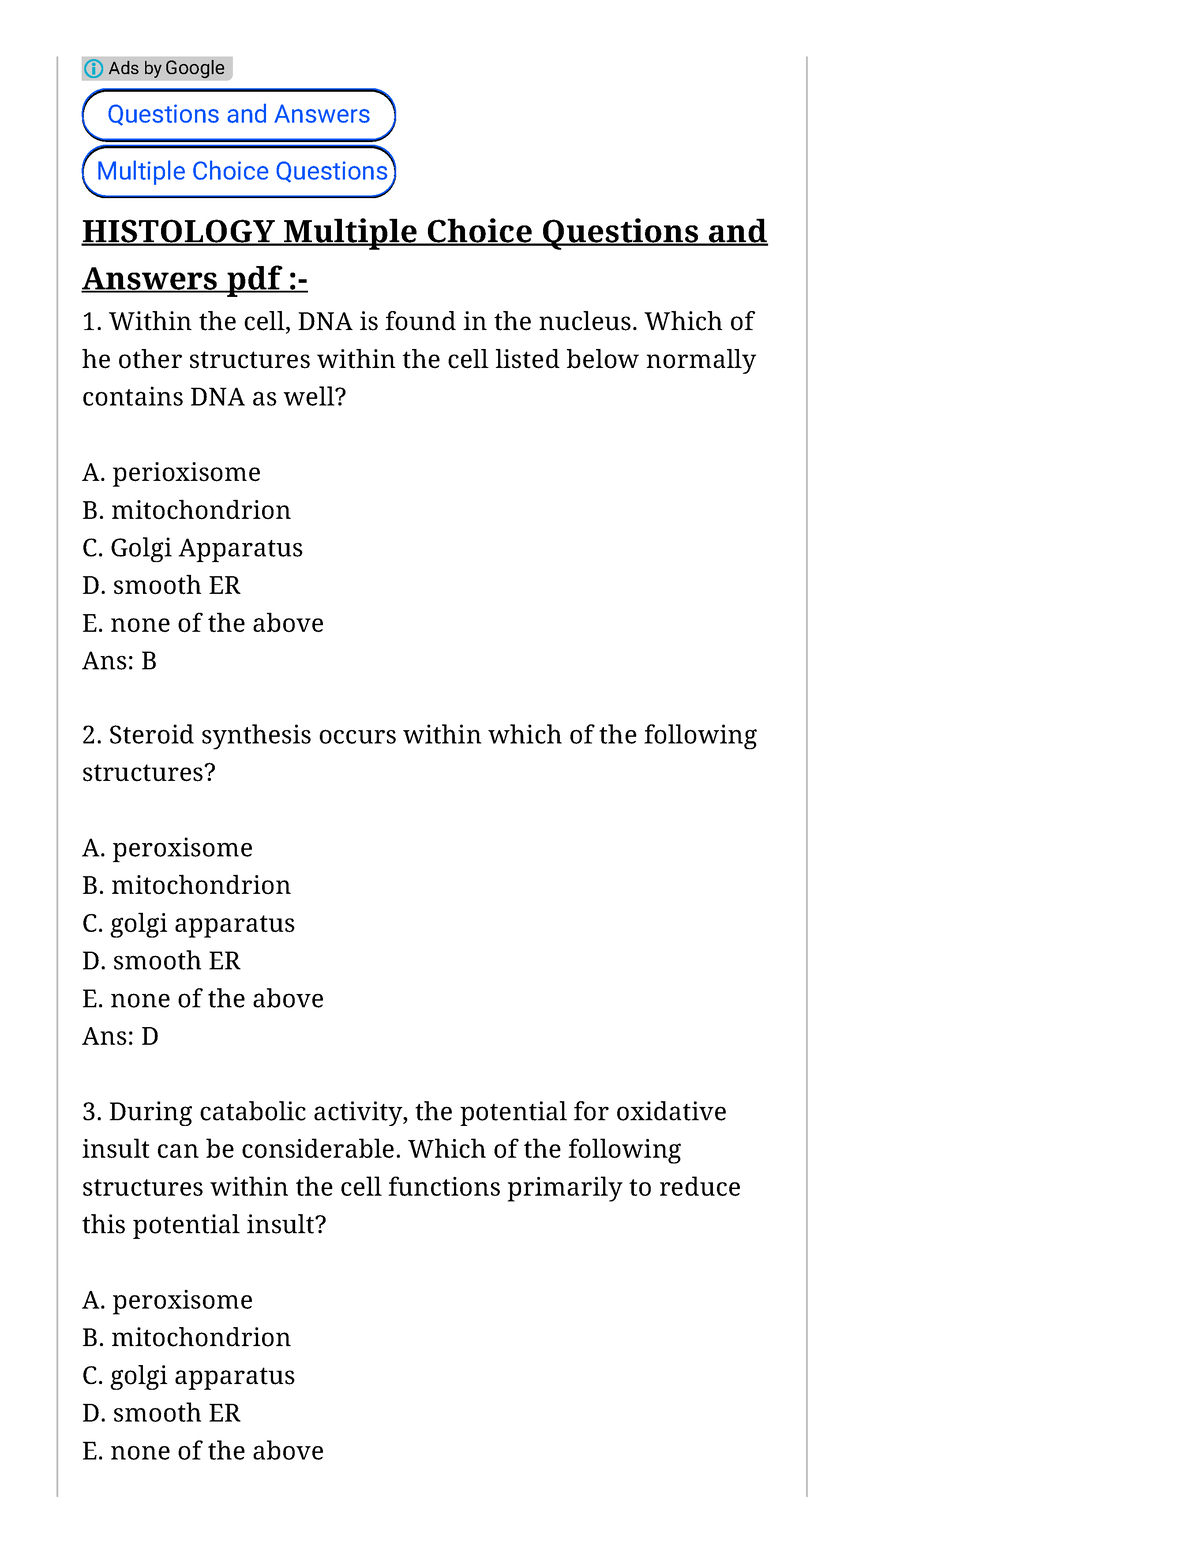 research methodology multiple choice questions and answers pdf download